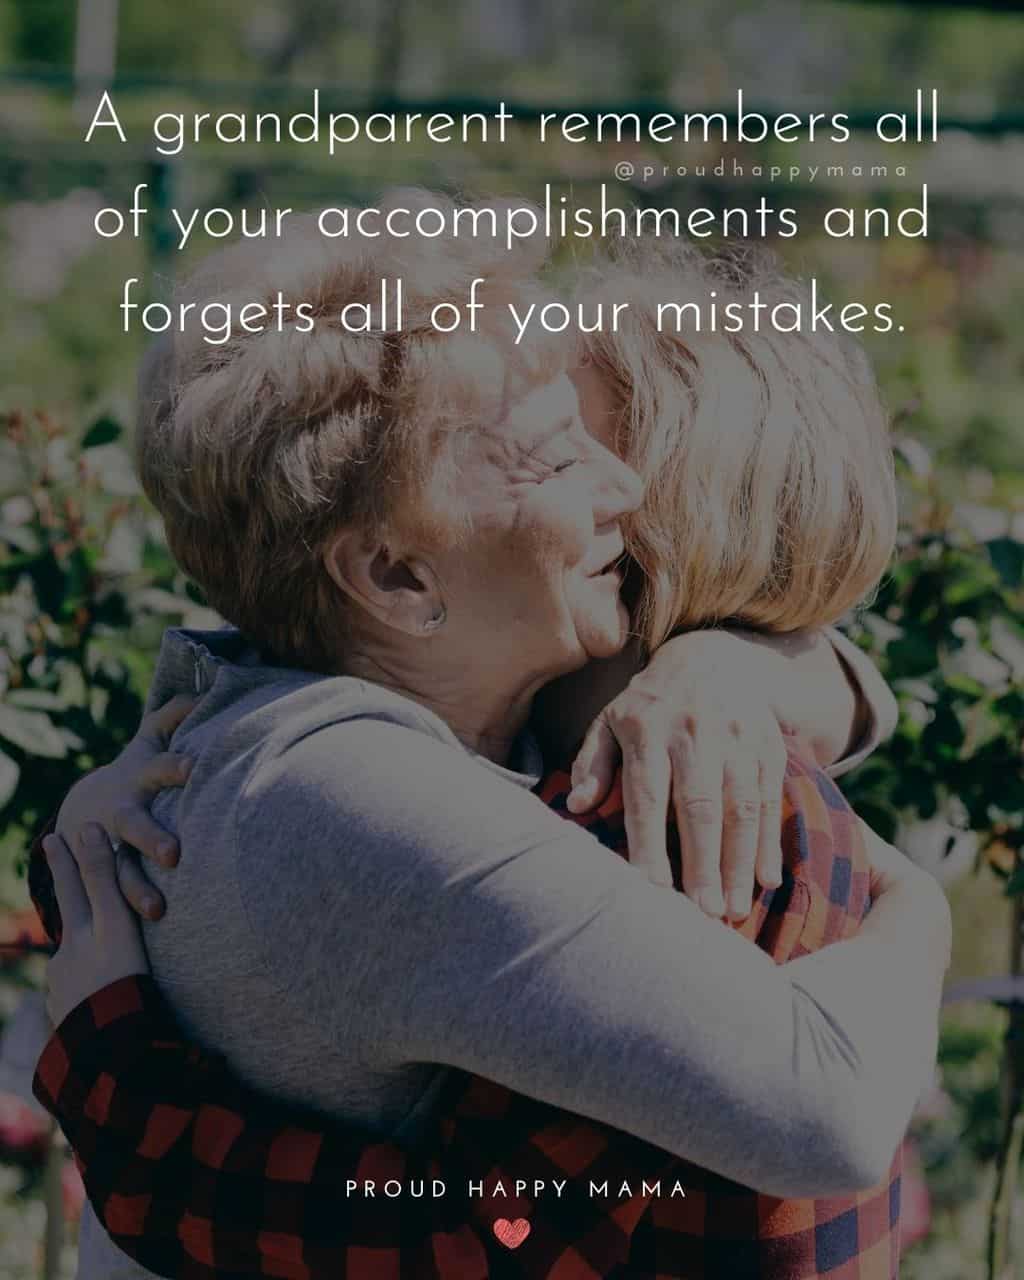 Grandparent Quotes – A grandparent remembers all of your accomplishments and forgets all of your mistakes.’